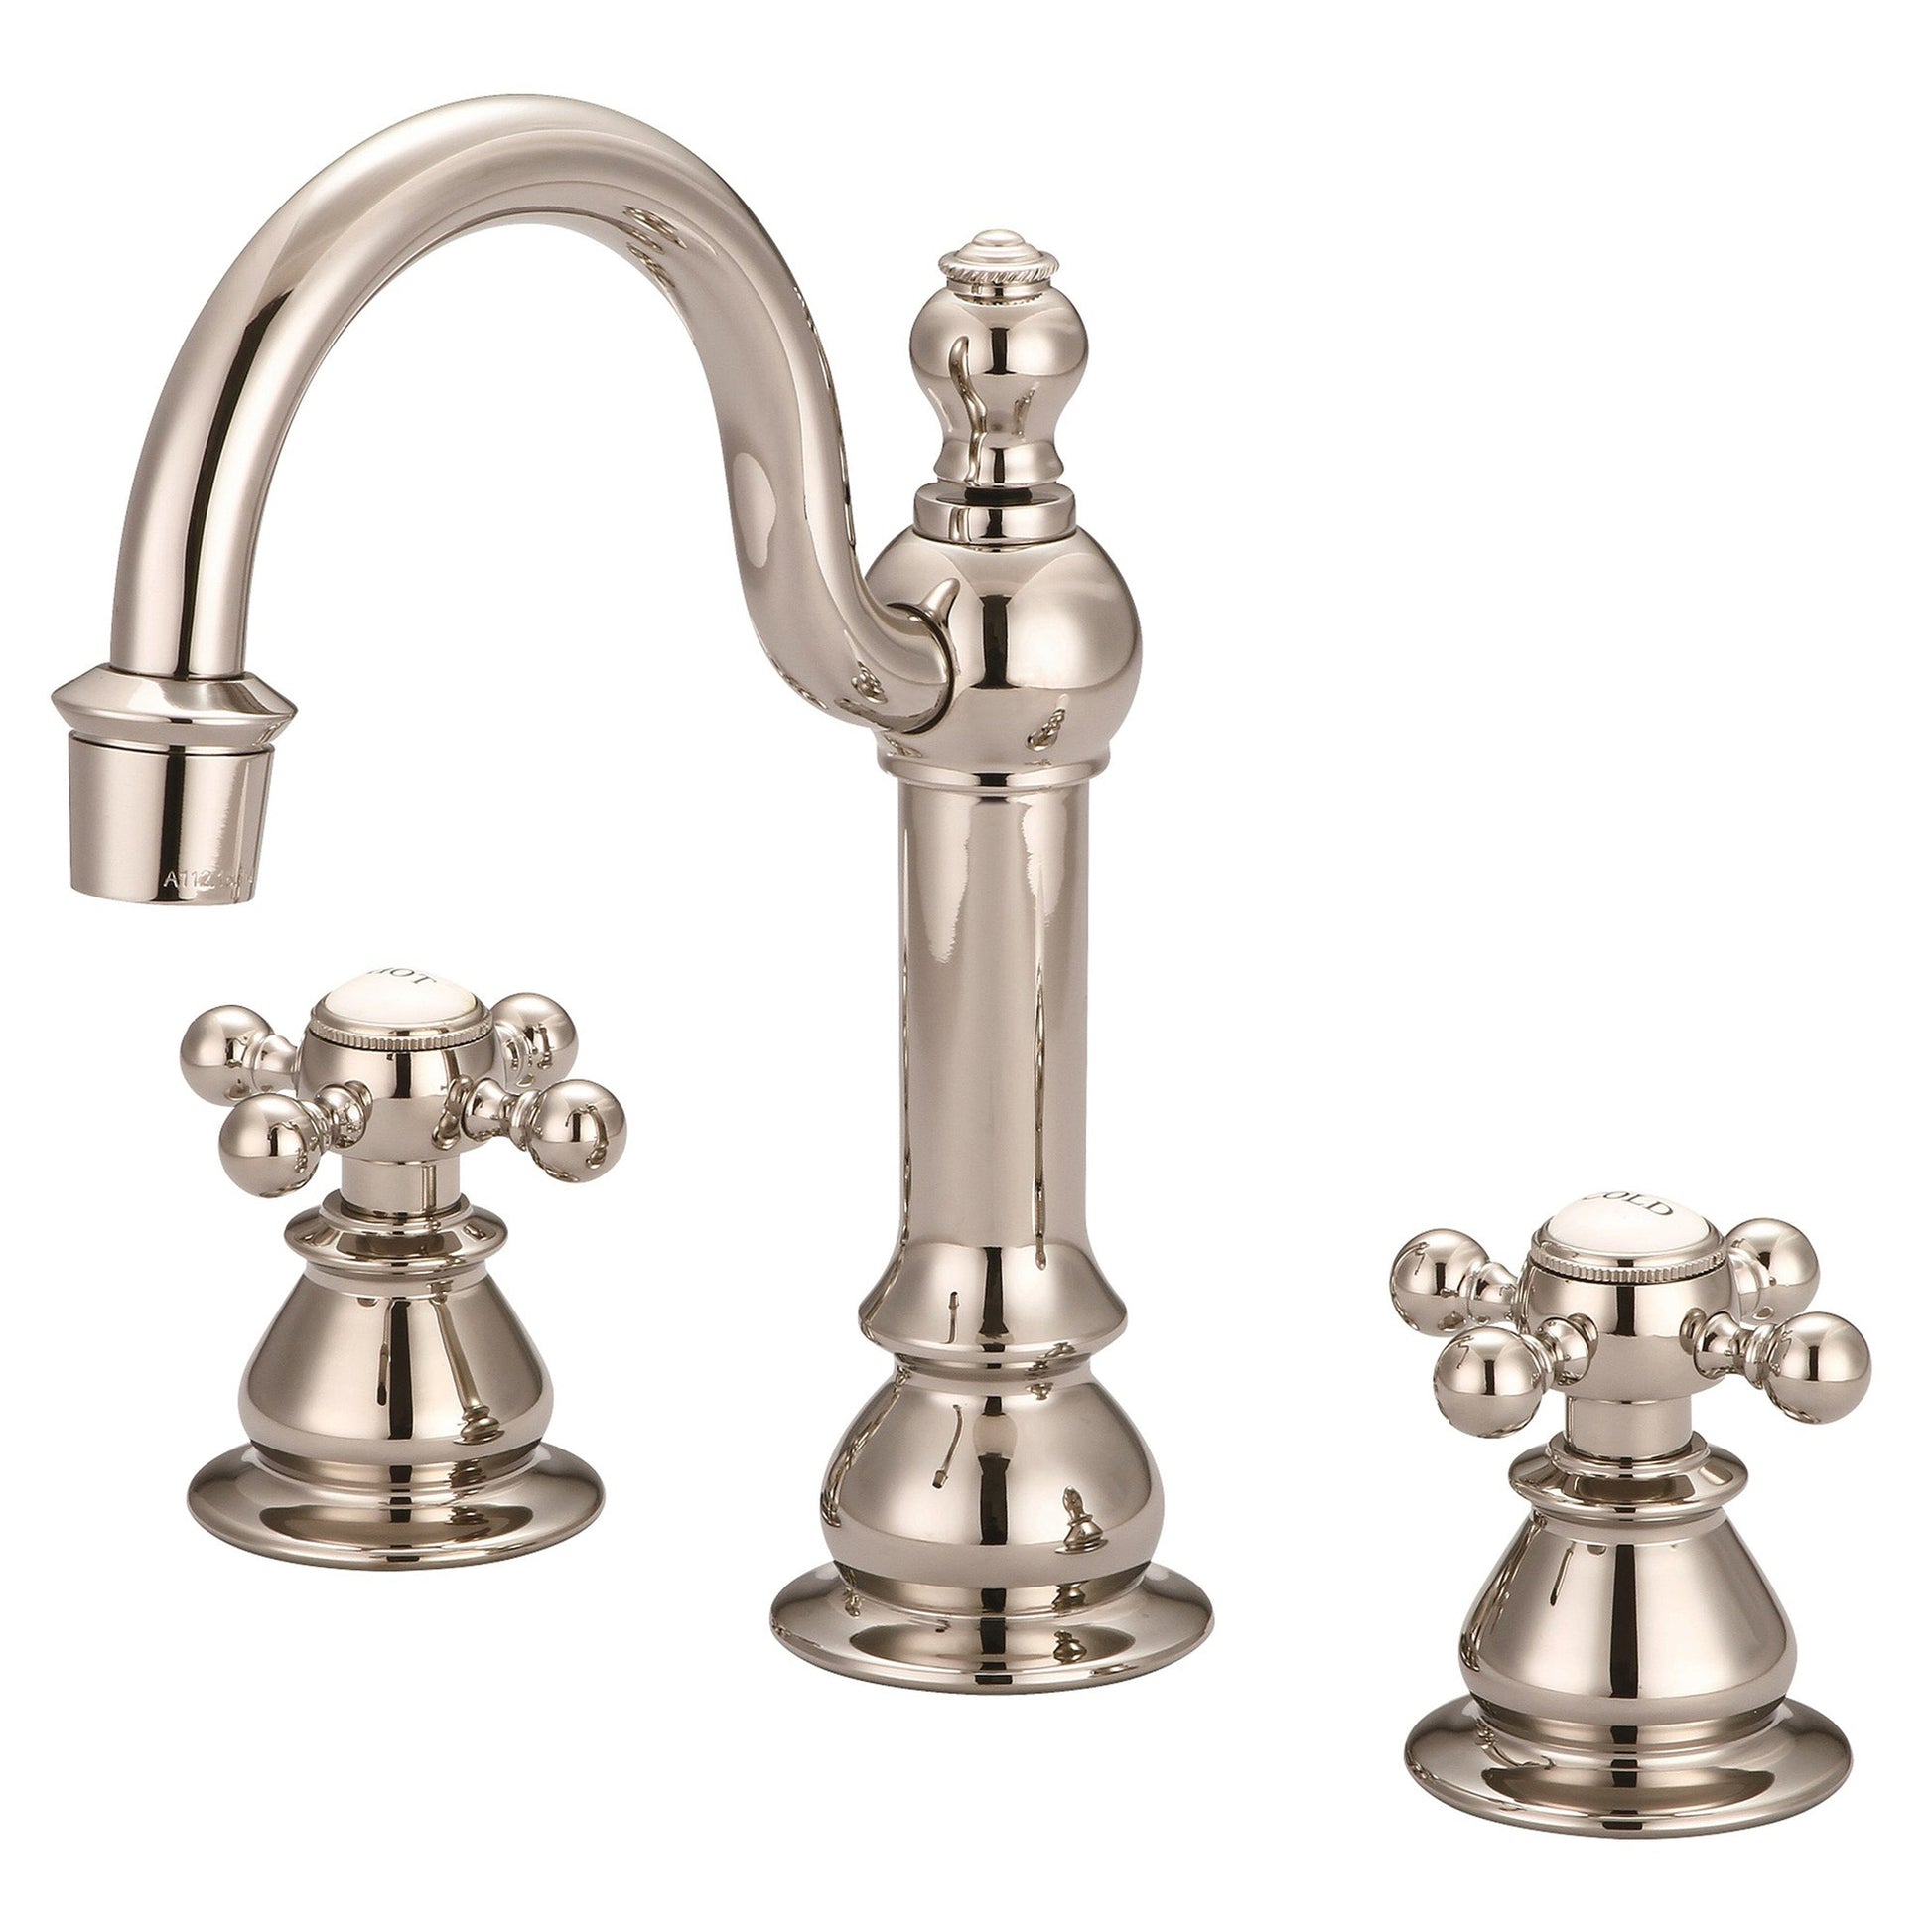 Water Creation American 20th Century Classic Widespread Lavatory F2-0012 8" Ivory Solid Brass Faucet With Pop-Up Drain And Metal Lever Handles, Hot And Cold Labels Included